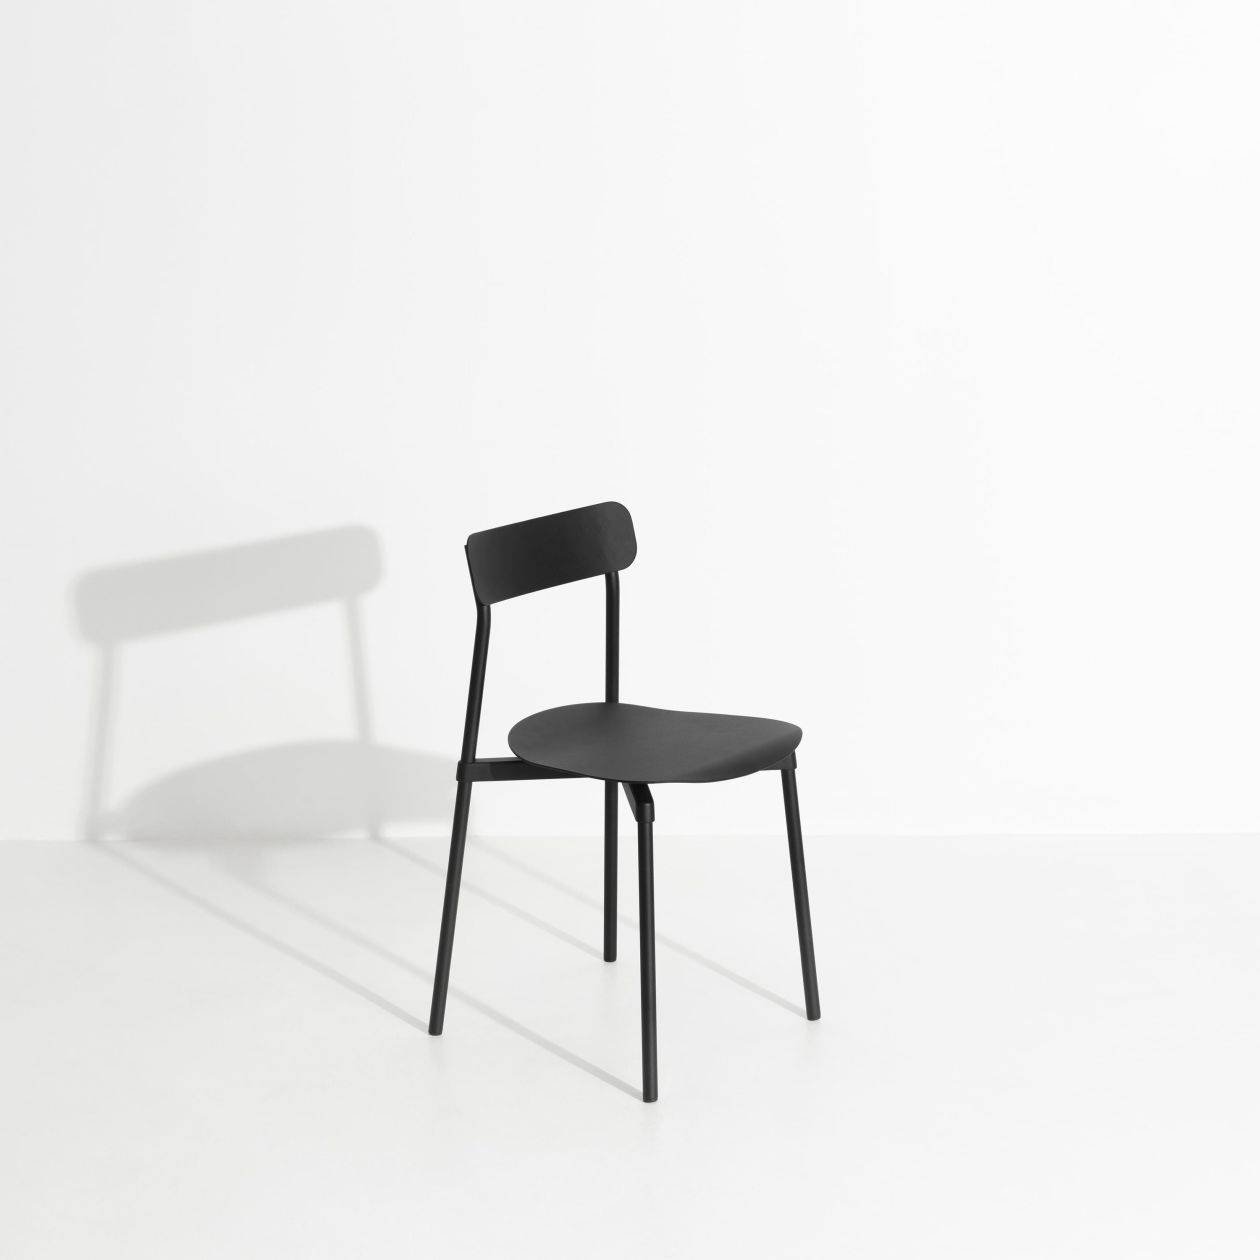 Fromme Chair - Black